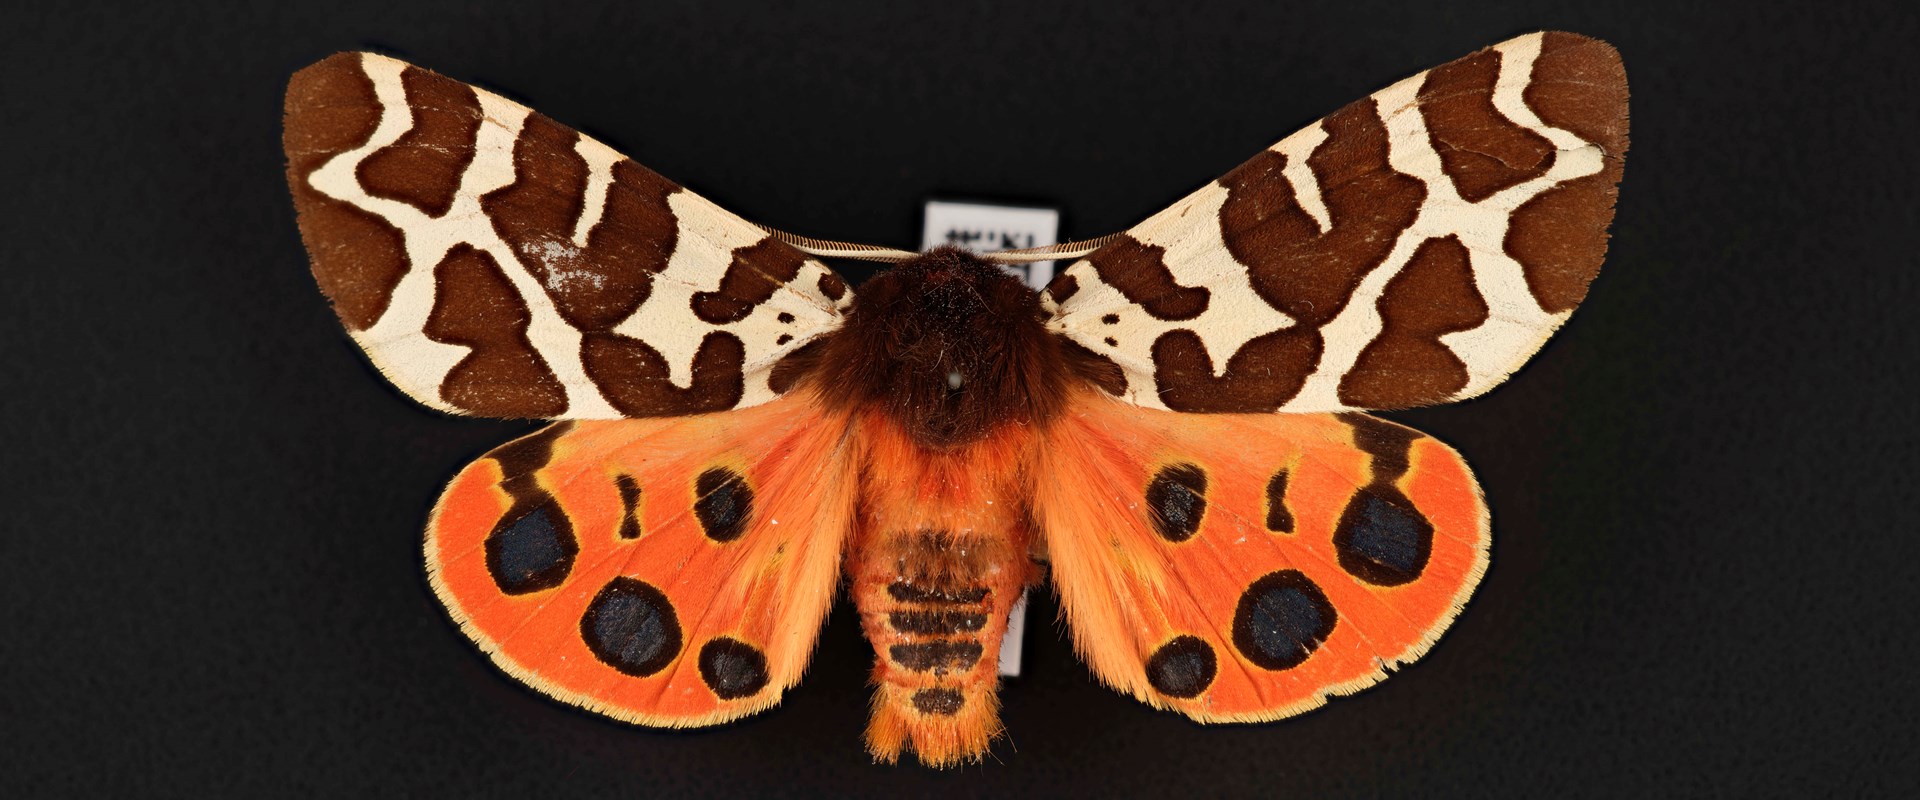 A moth specimen with black and white stripes and black and red markings on its wings.